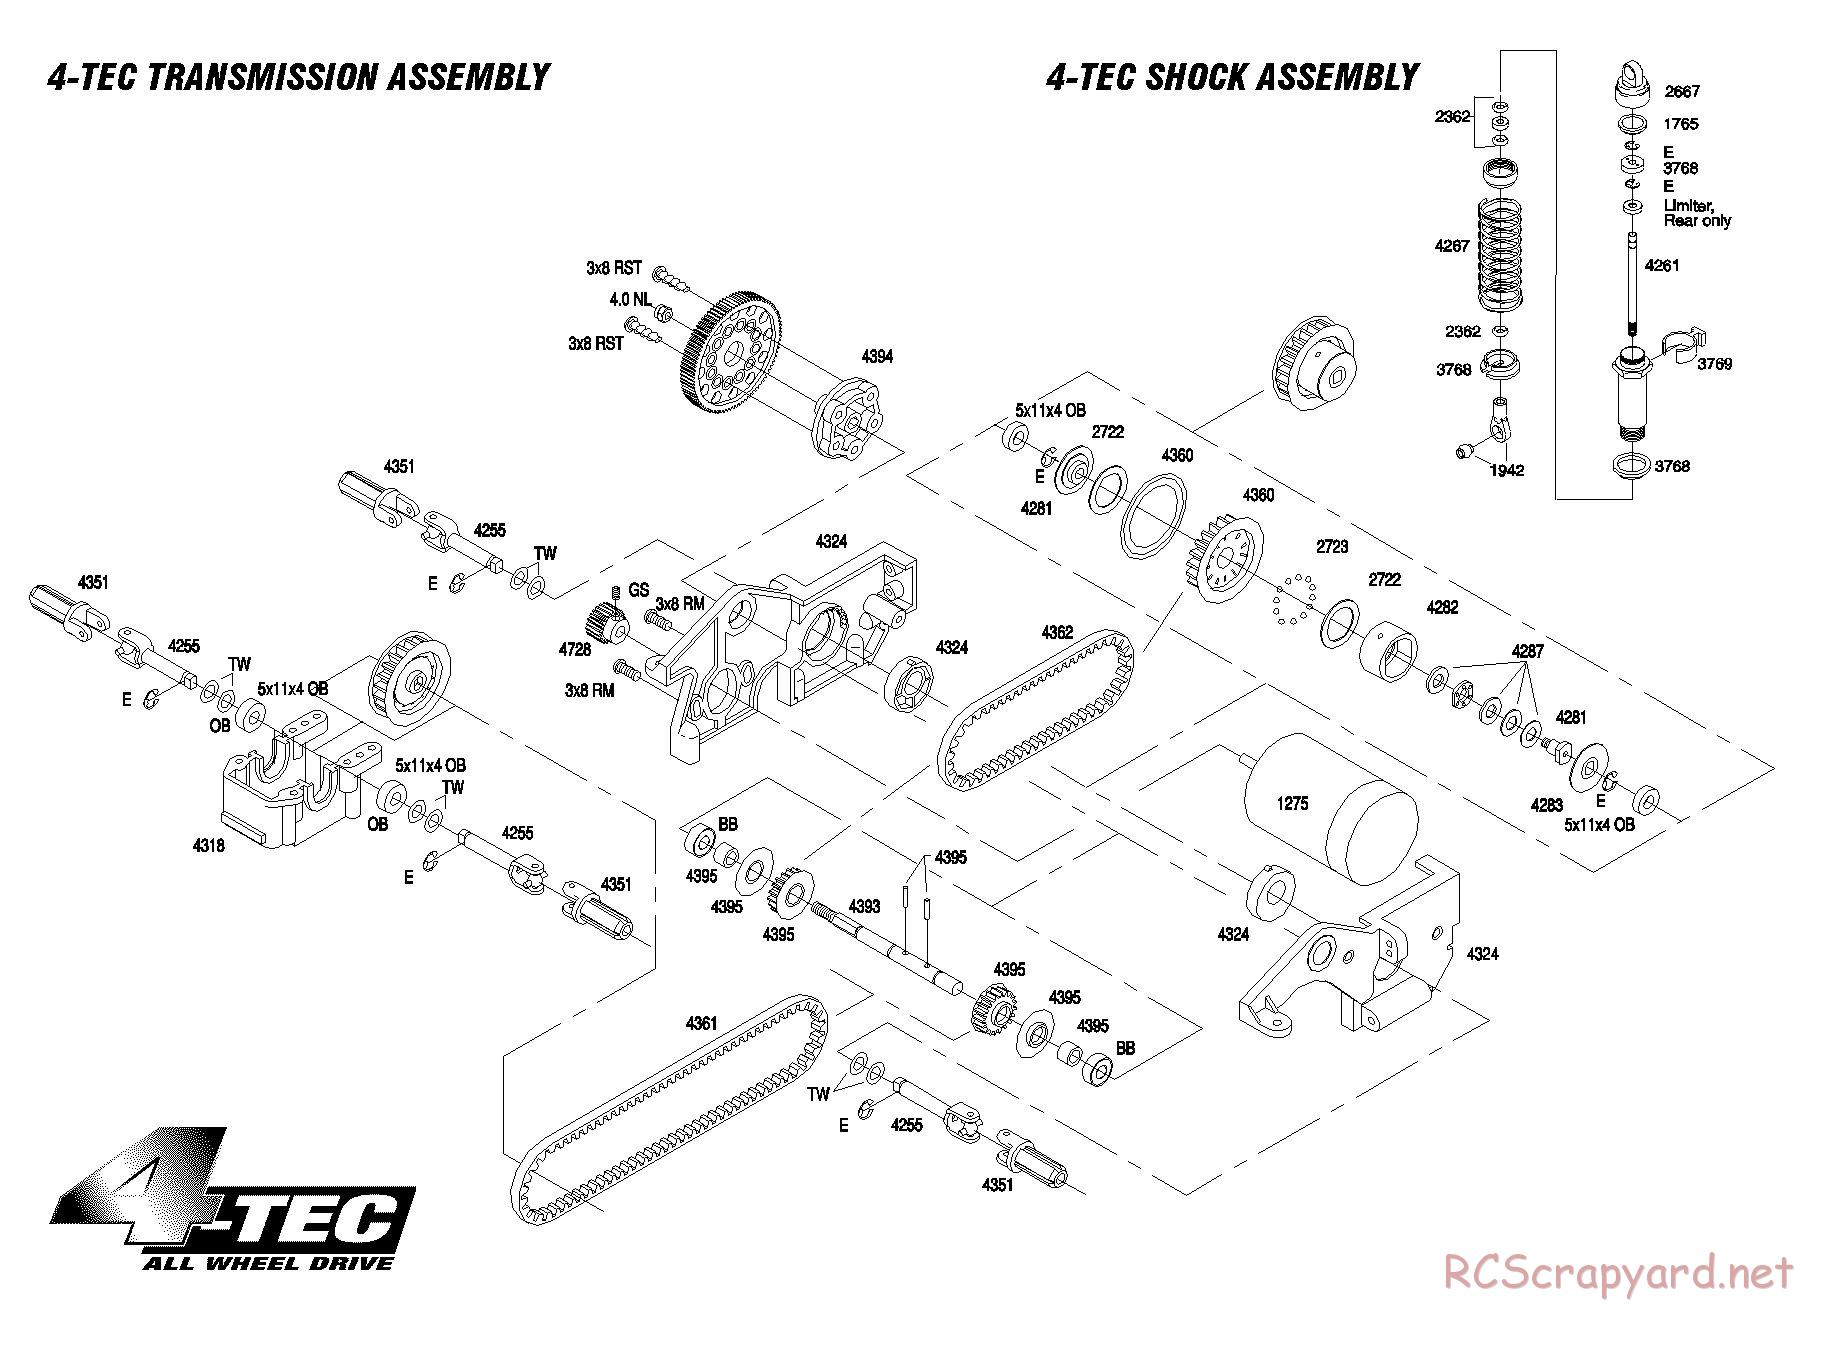 Traxxas - 4-Tec (1998) - Exploded Views - Page 3